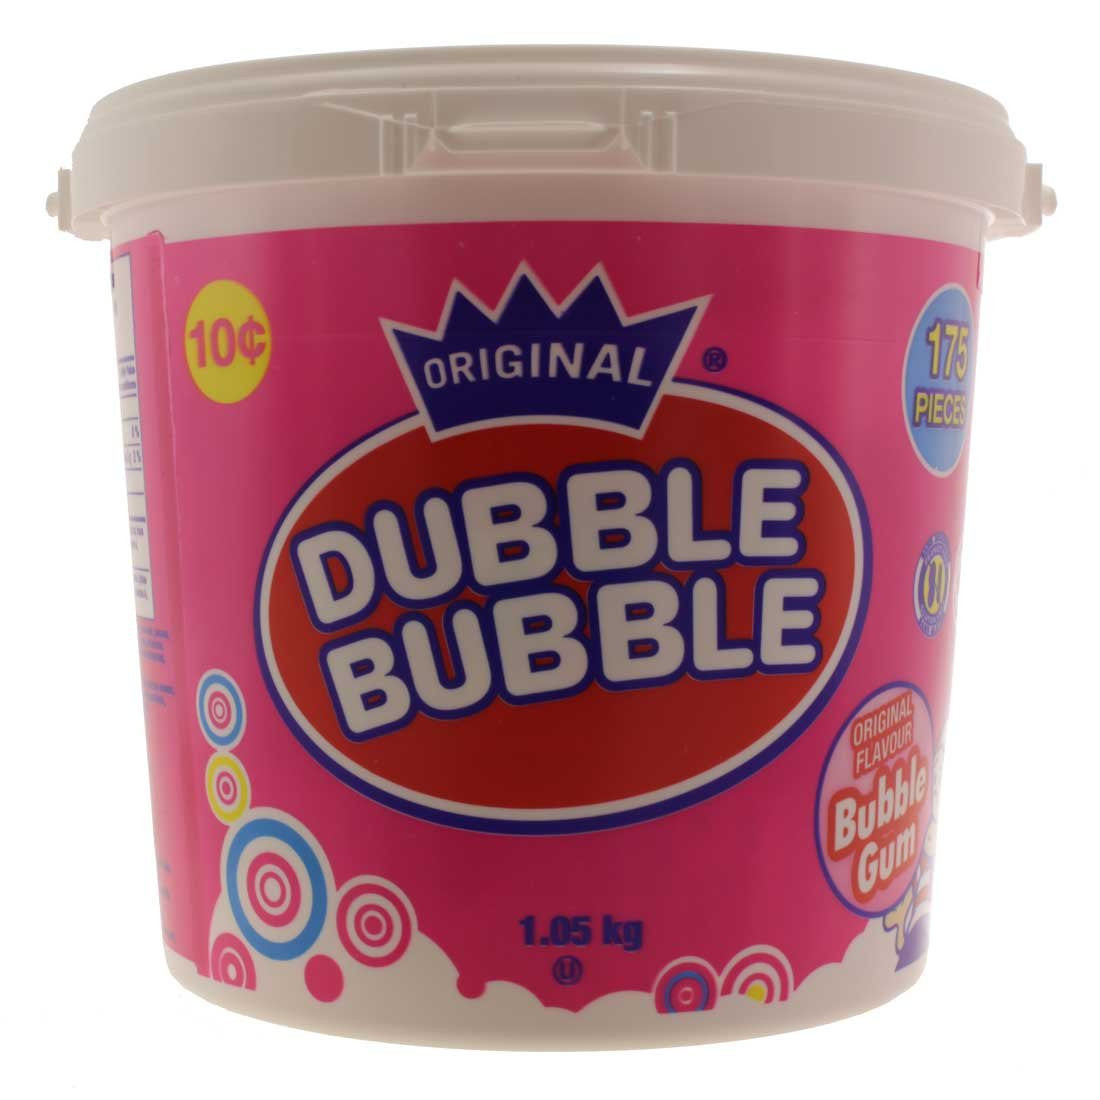 Dubble Bubble Classic 175 count Bubble Gum Tub - 1.05kg/2.3lbs., {Imported from Canada}